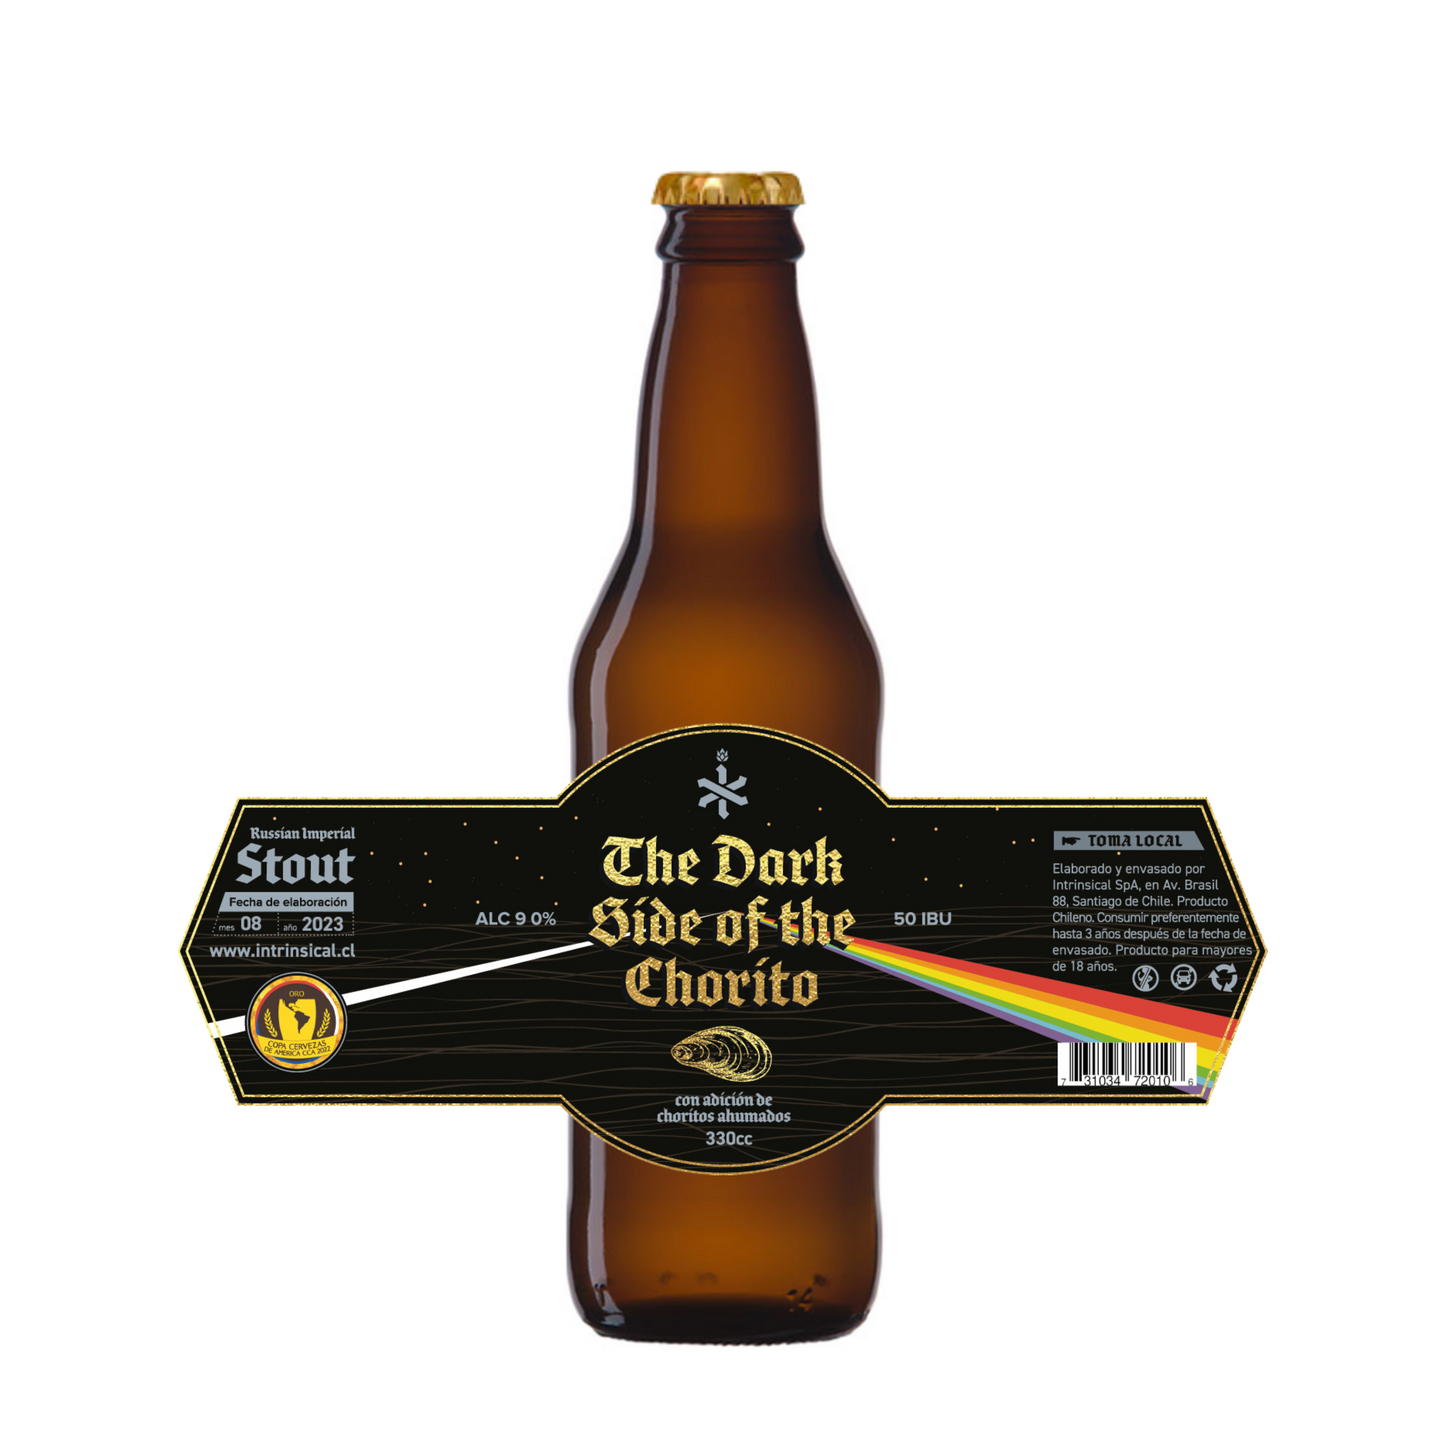 The Darkside of the chorito - Imperial Stout